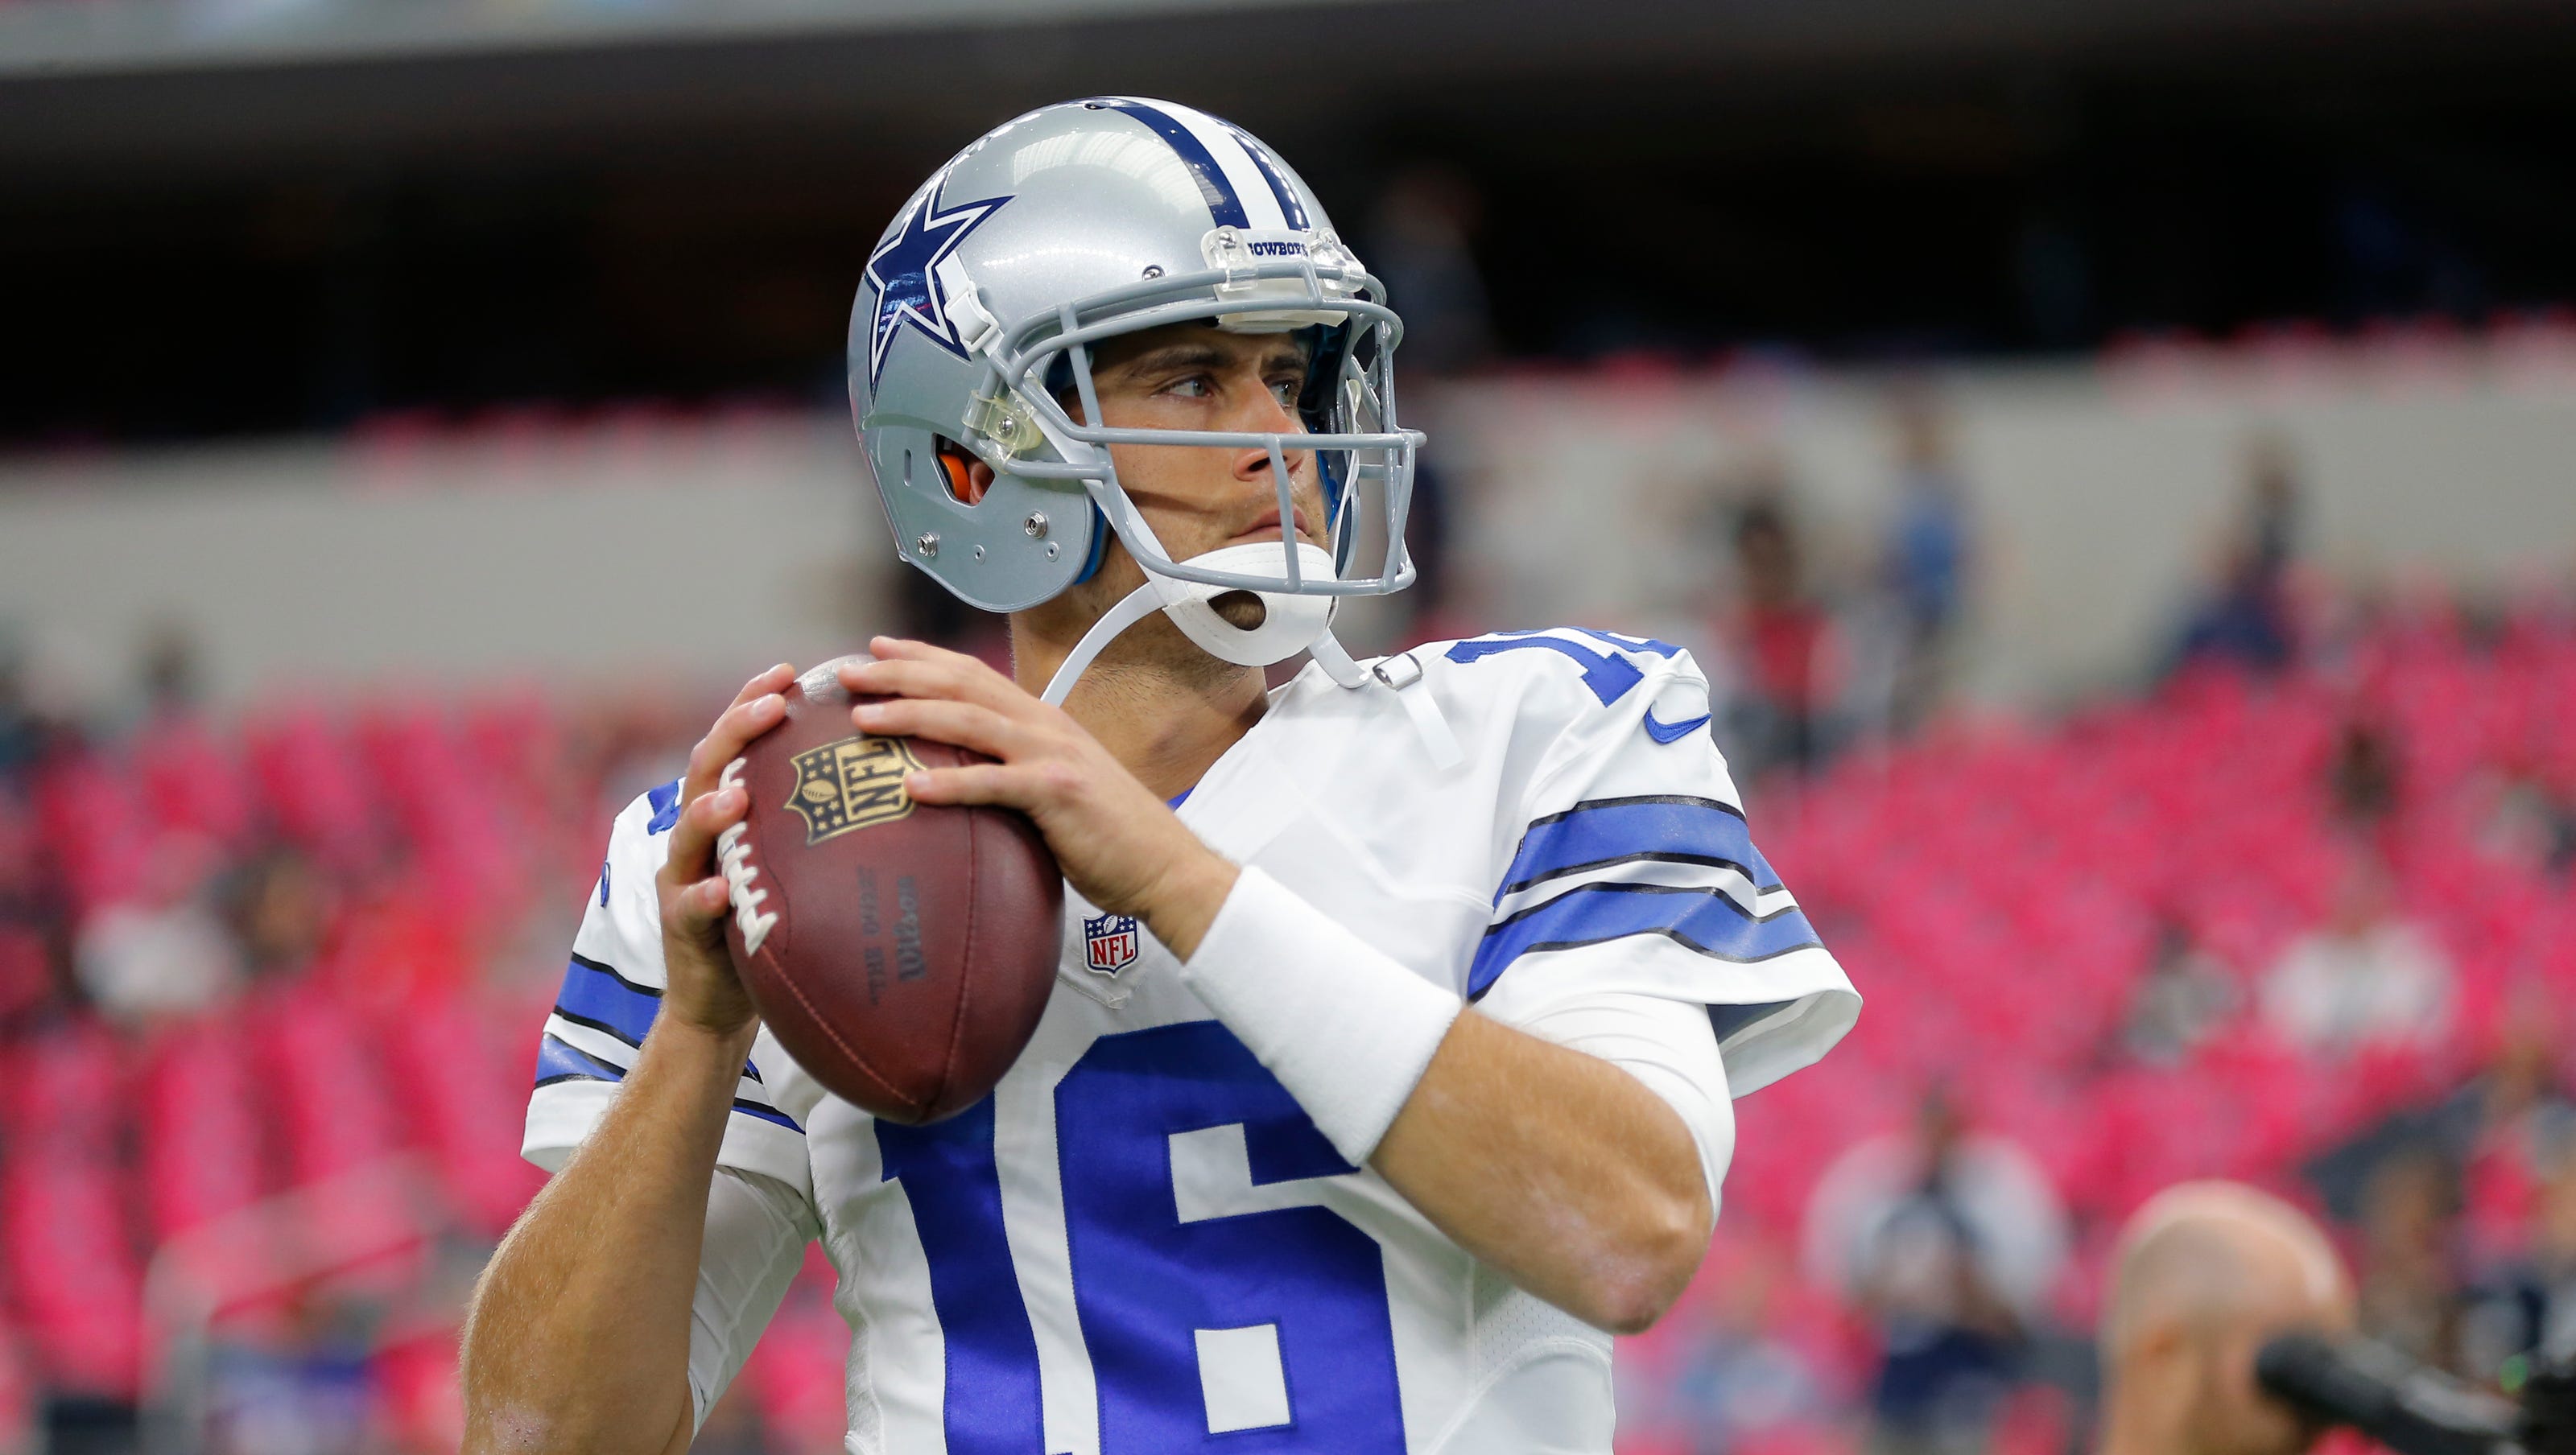 Matt Cassel to take over as Cowboys' starting QB after bye